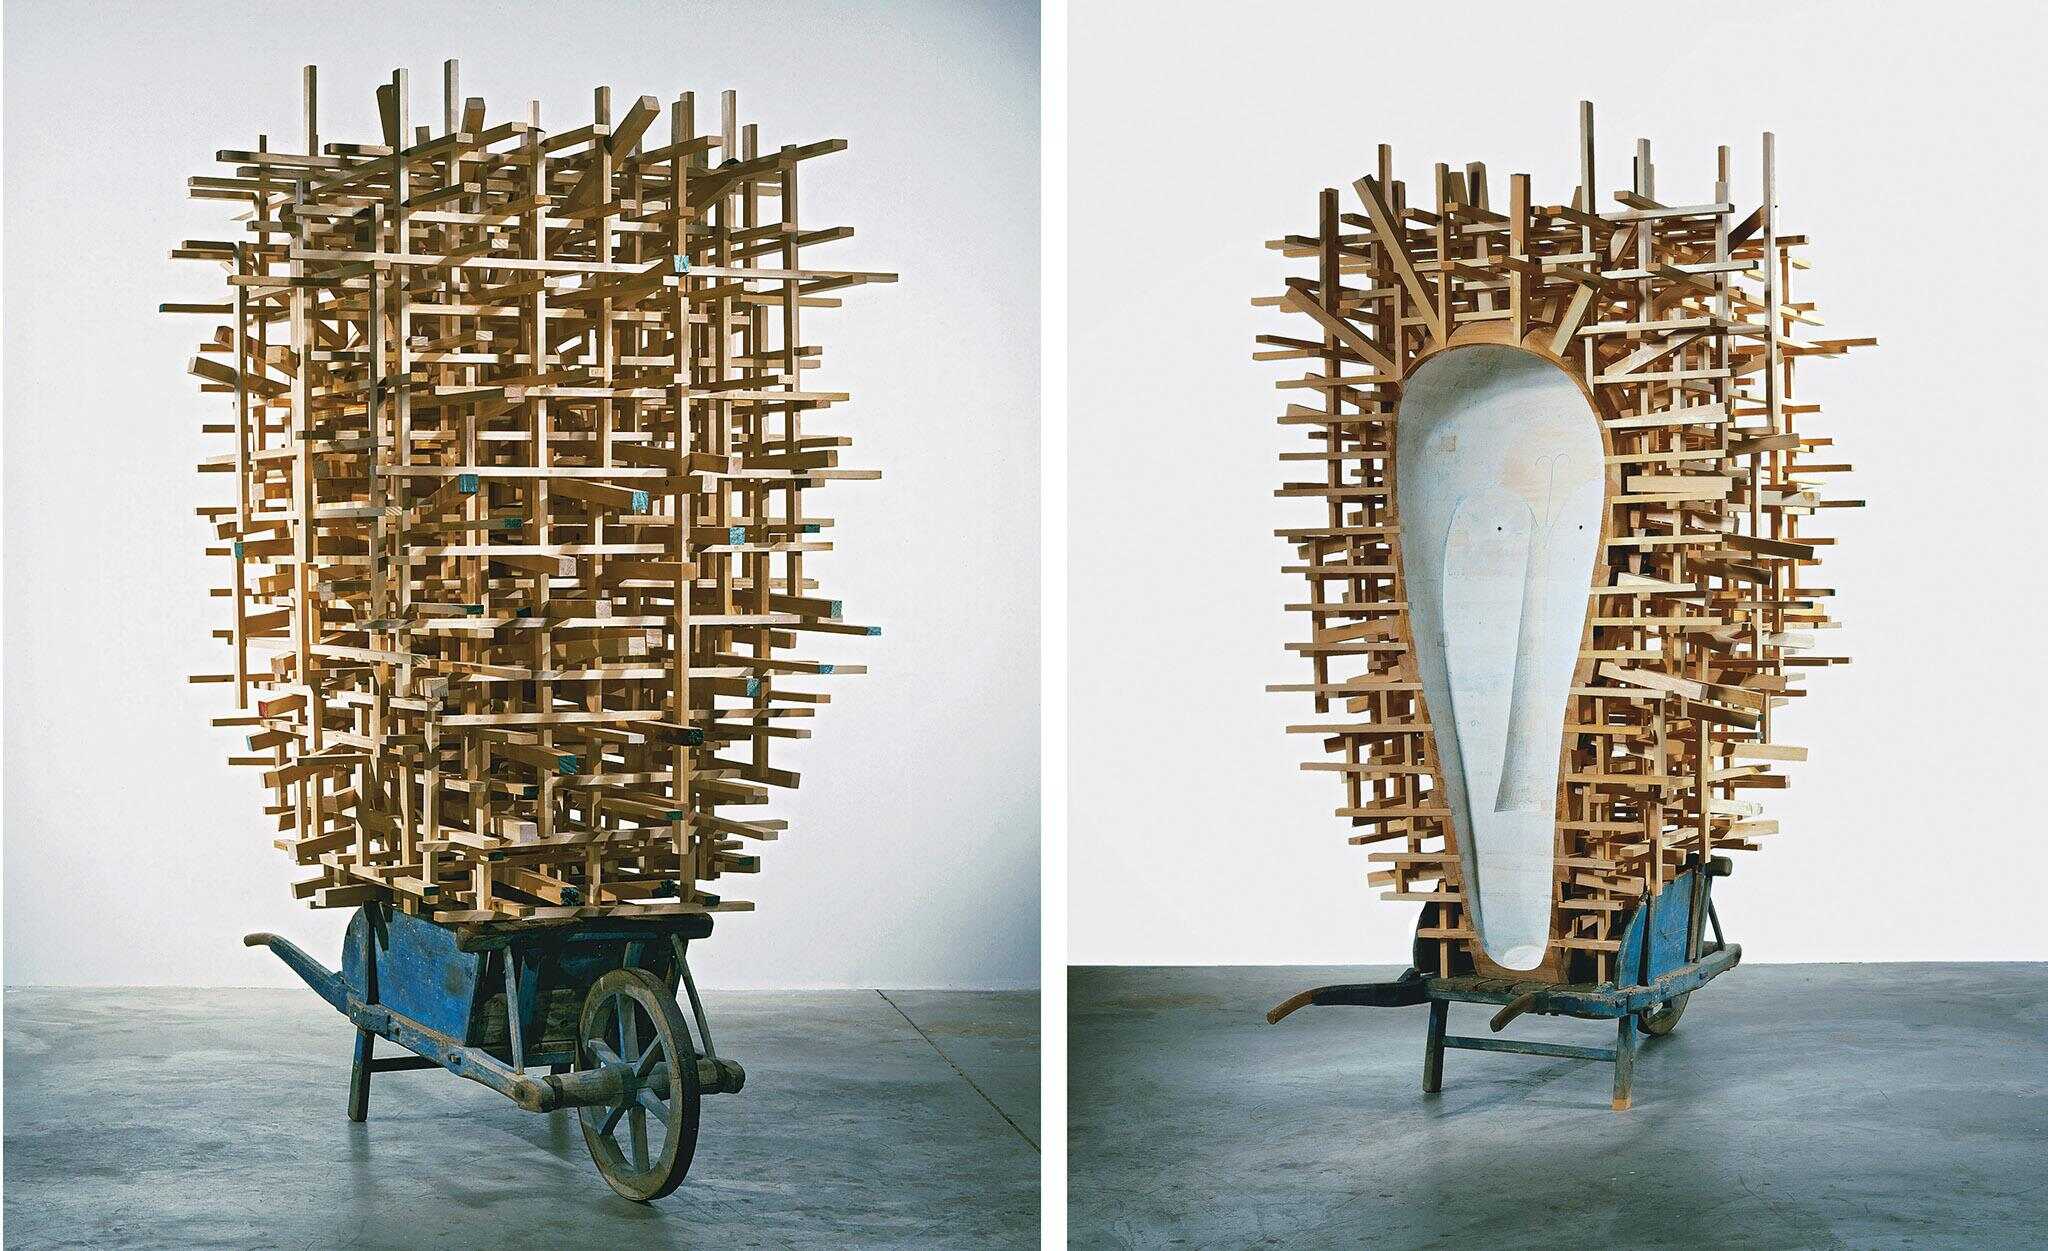 How Does Martin Puryear’s C.F.A.O. Take Advantage Of The Distinctive Qualities Of Sculpture?